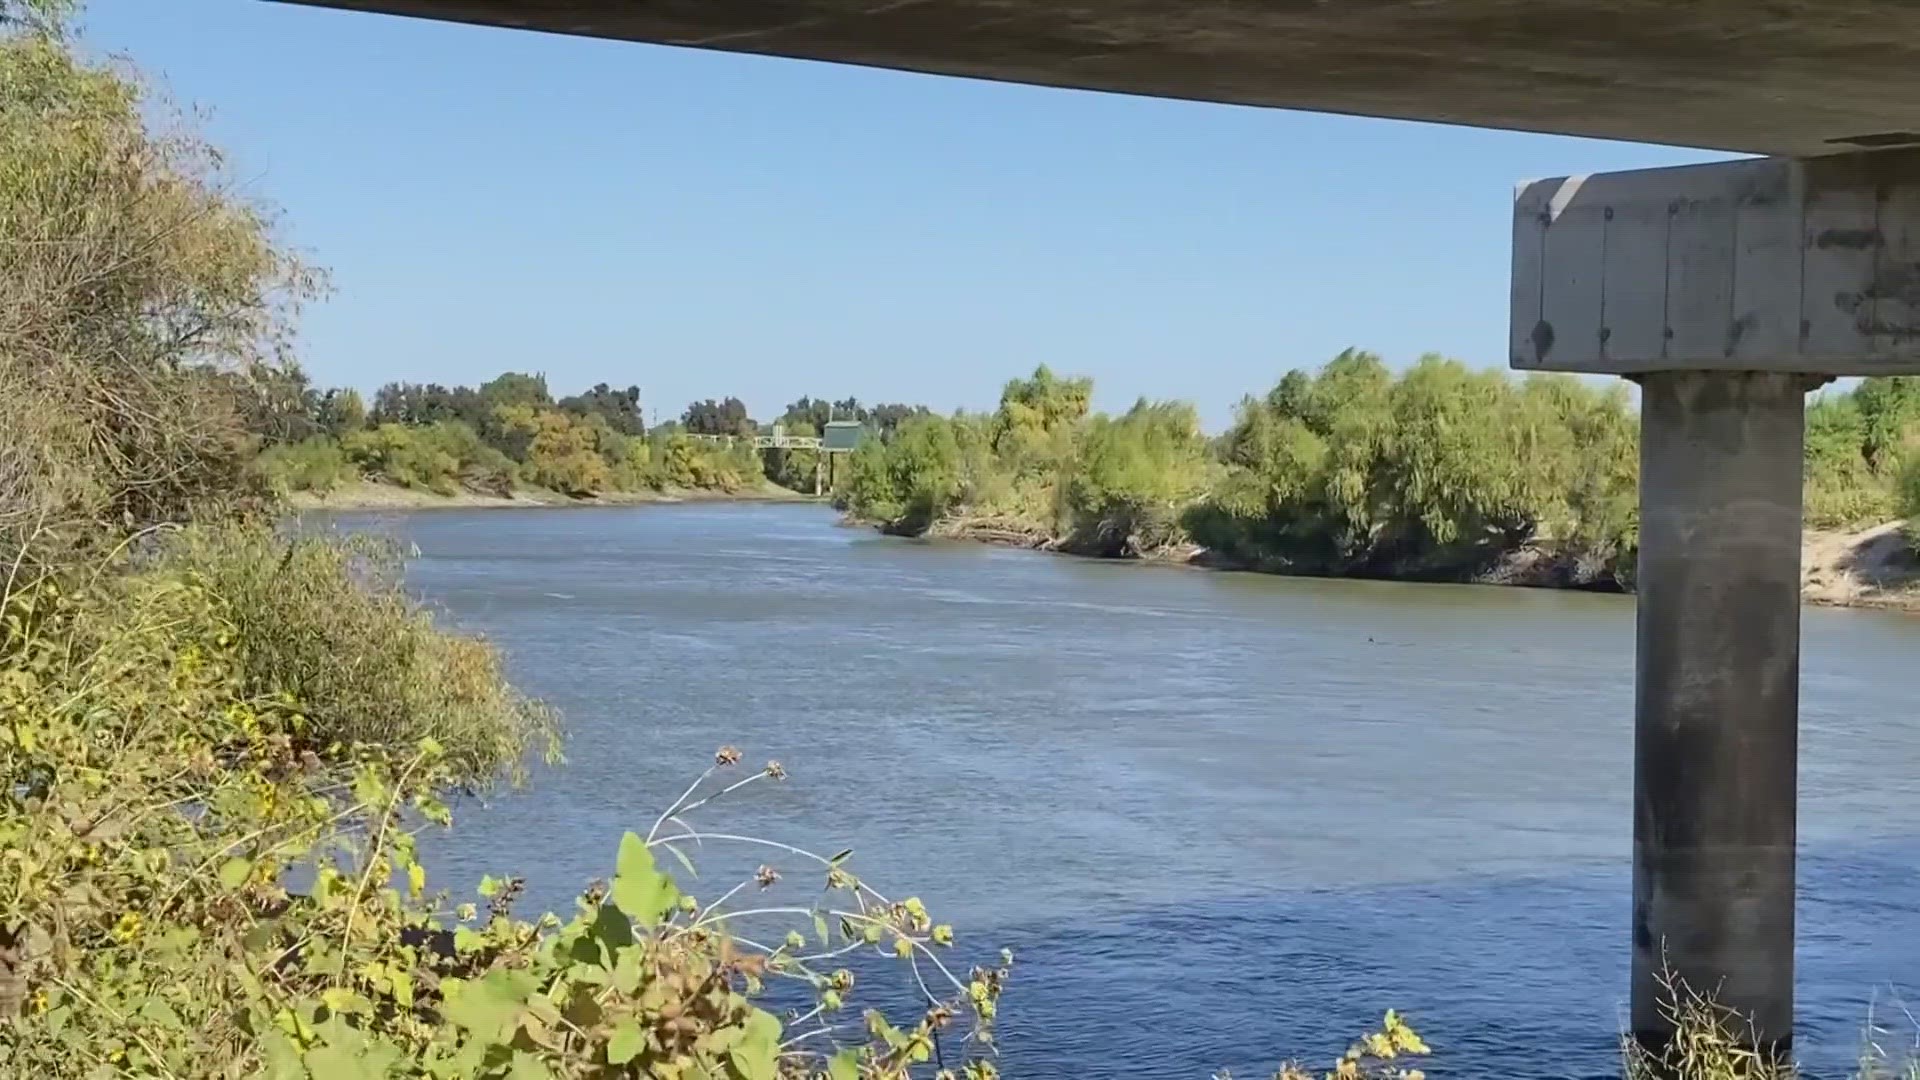 Man who helped save woman, child from San Joaquin River found dead